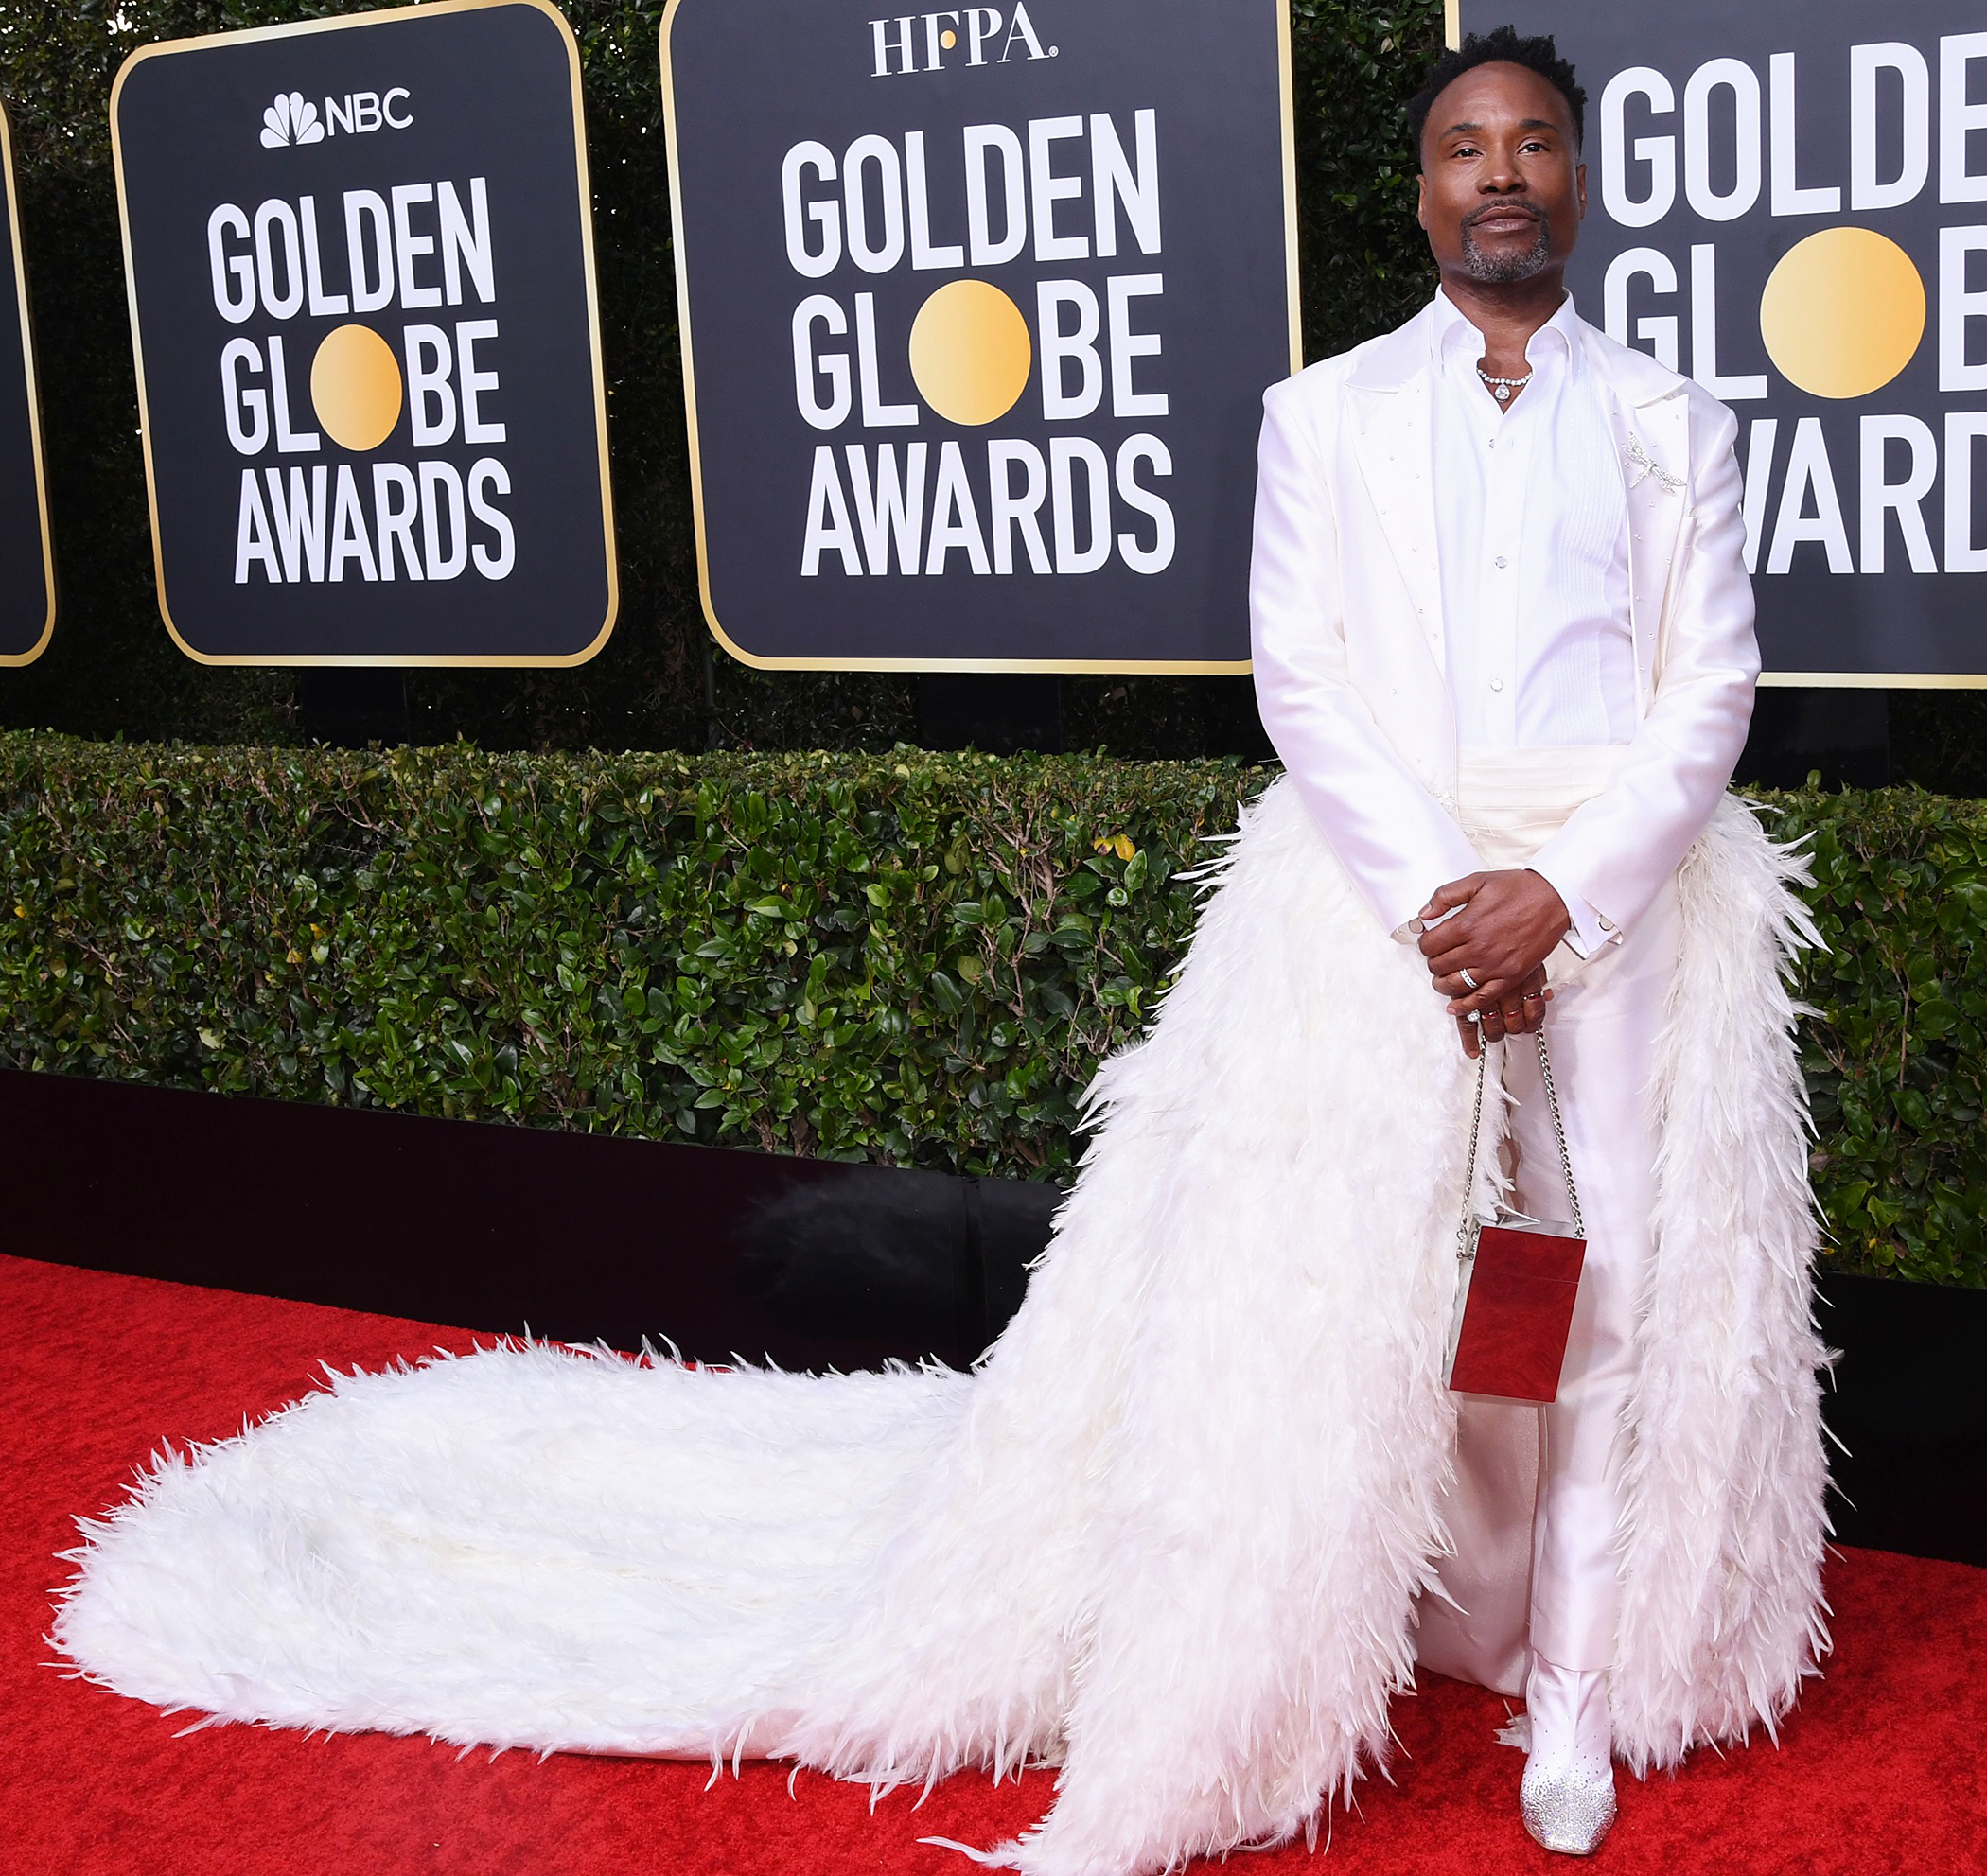 Billy Porter's Best Red Carpet Fashion, Beauty Moments